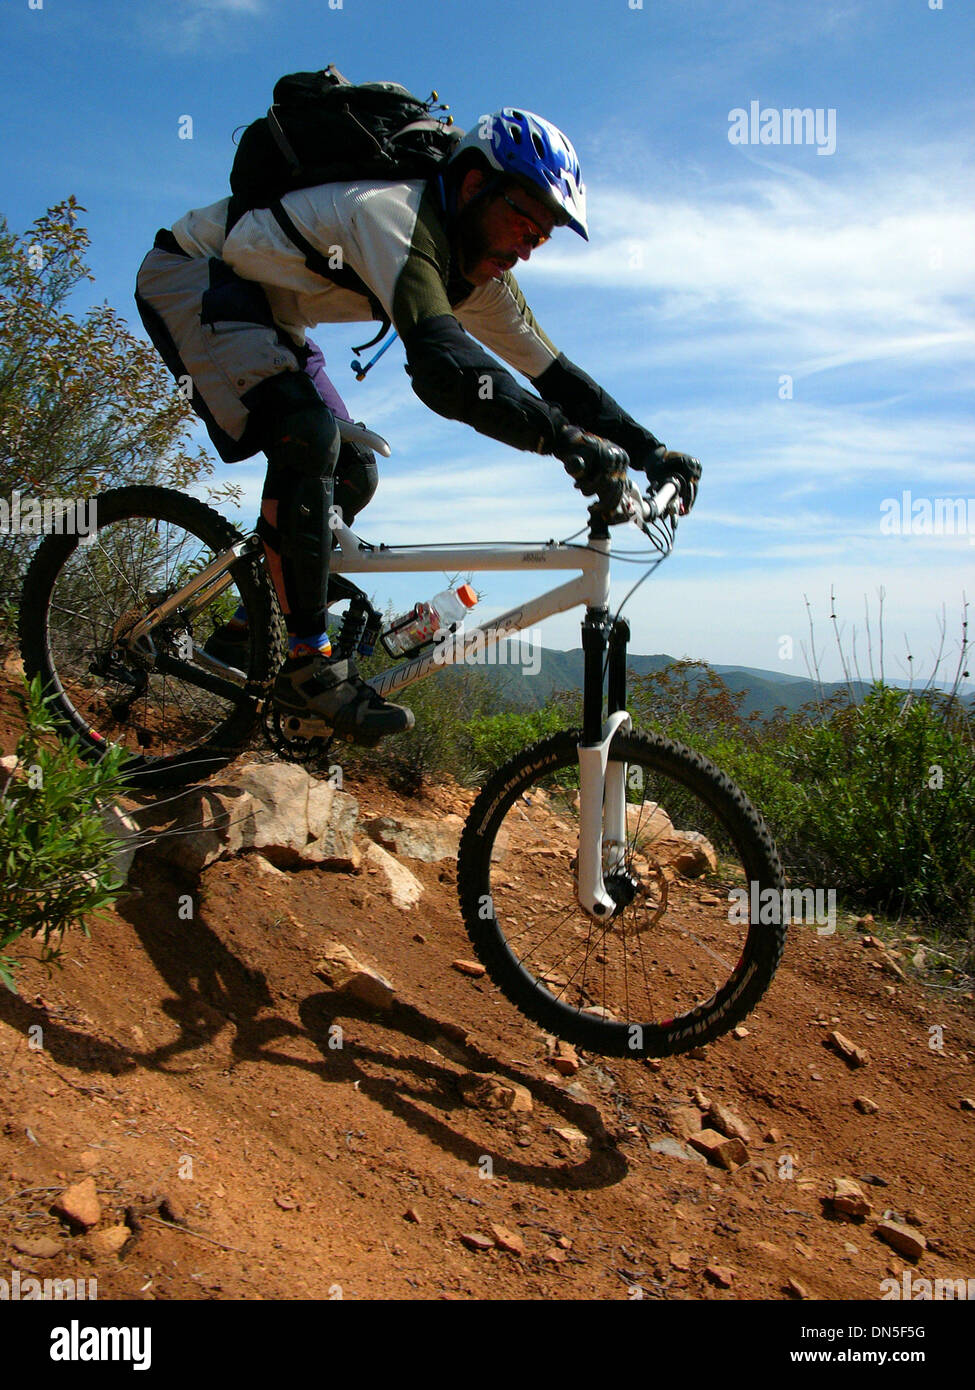 Sep 23, 2006; San Juan, CA, USA; Mountain biking is roughly broken down into five categories: cross country, downhill, Freeride, Dirt Jump and trials/street riding. However, most mountain bikes have a similar look: knobby tires, large round frame tubing, and some sort of suspension or shock absorbers are the usual pieces of equipment. The sport requires endurance, bike handling ski Stock Photo